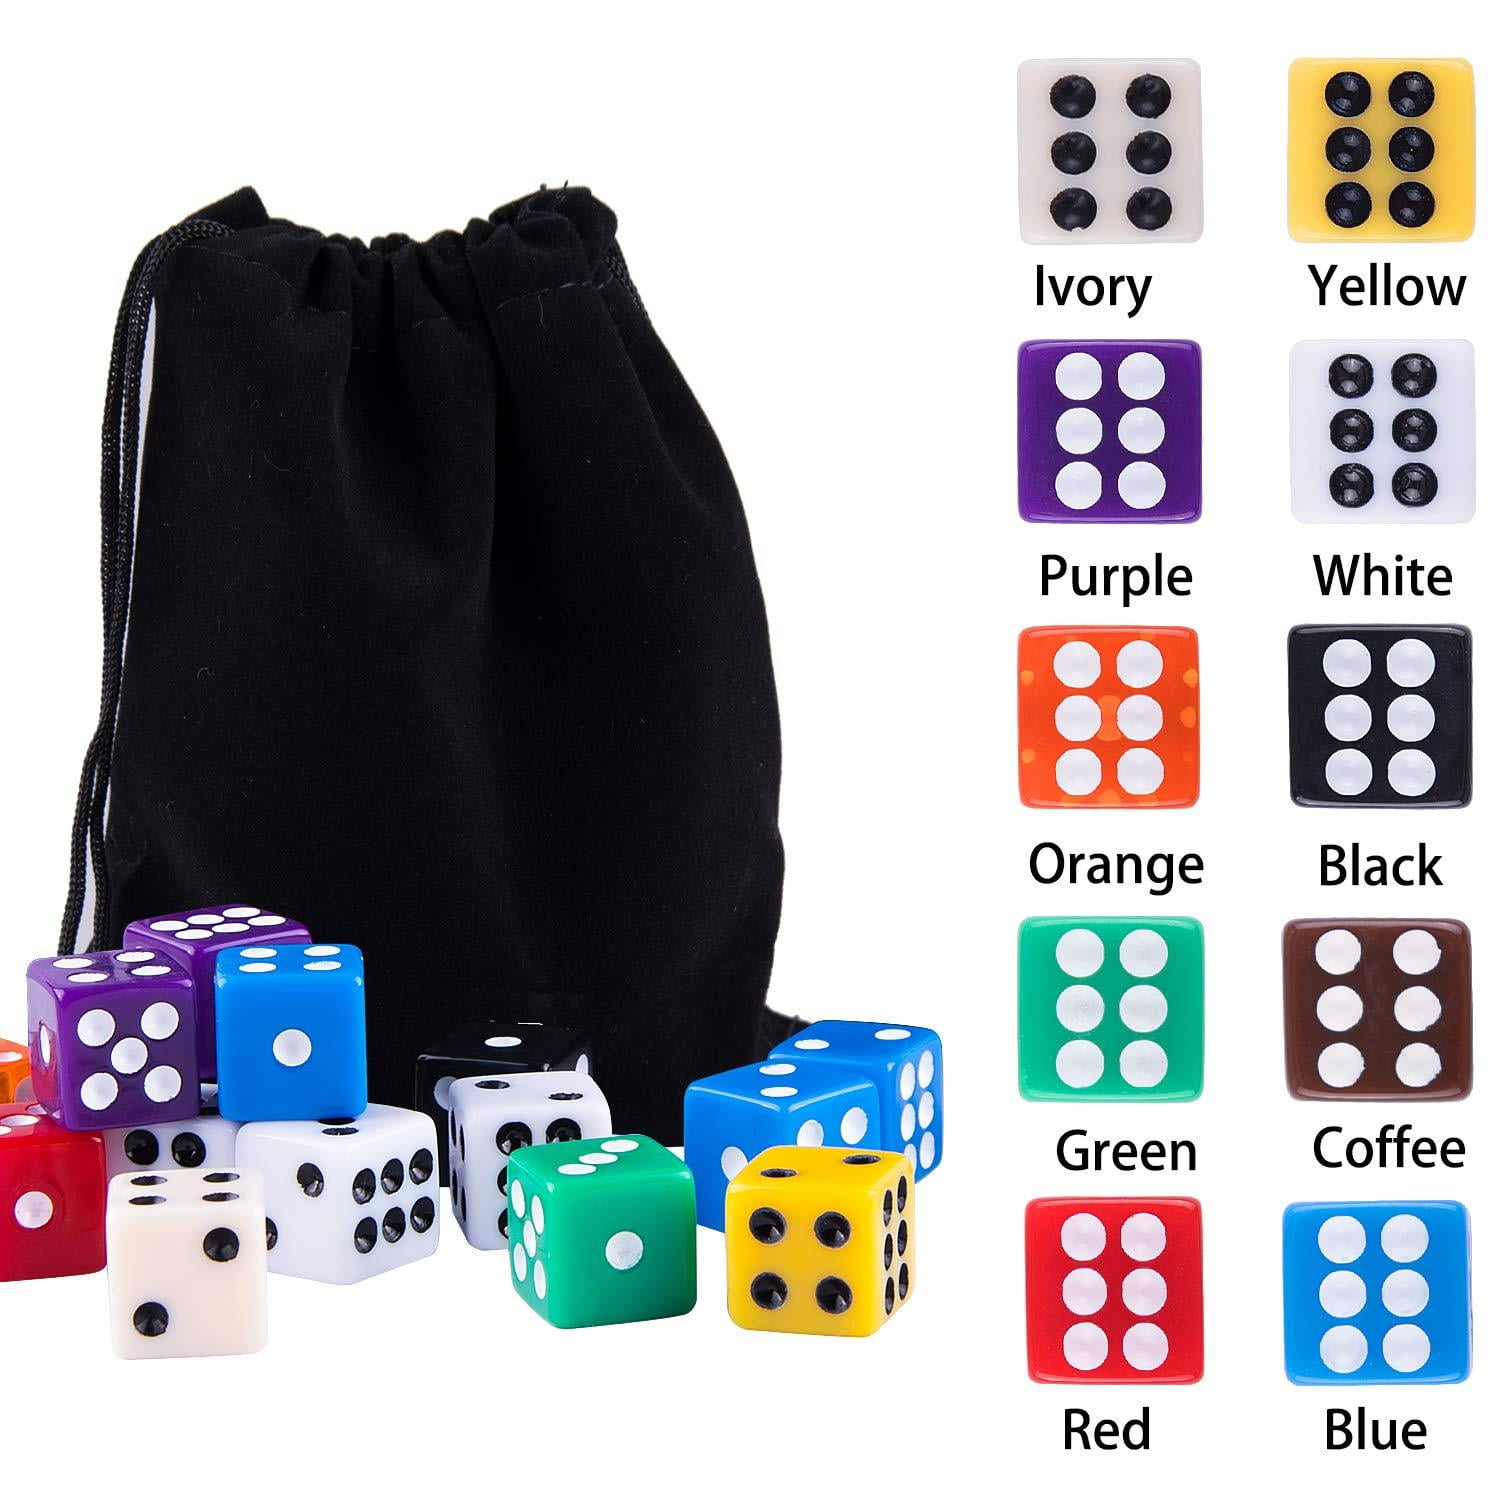 100 Pieces 12MM 6 Sided Dice Set Translucent Colors Dice with Black Pouch for Board Game 